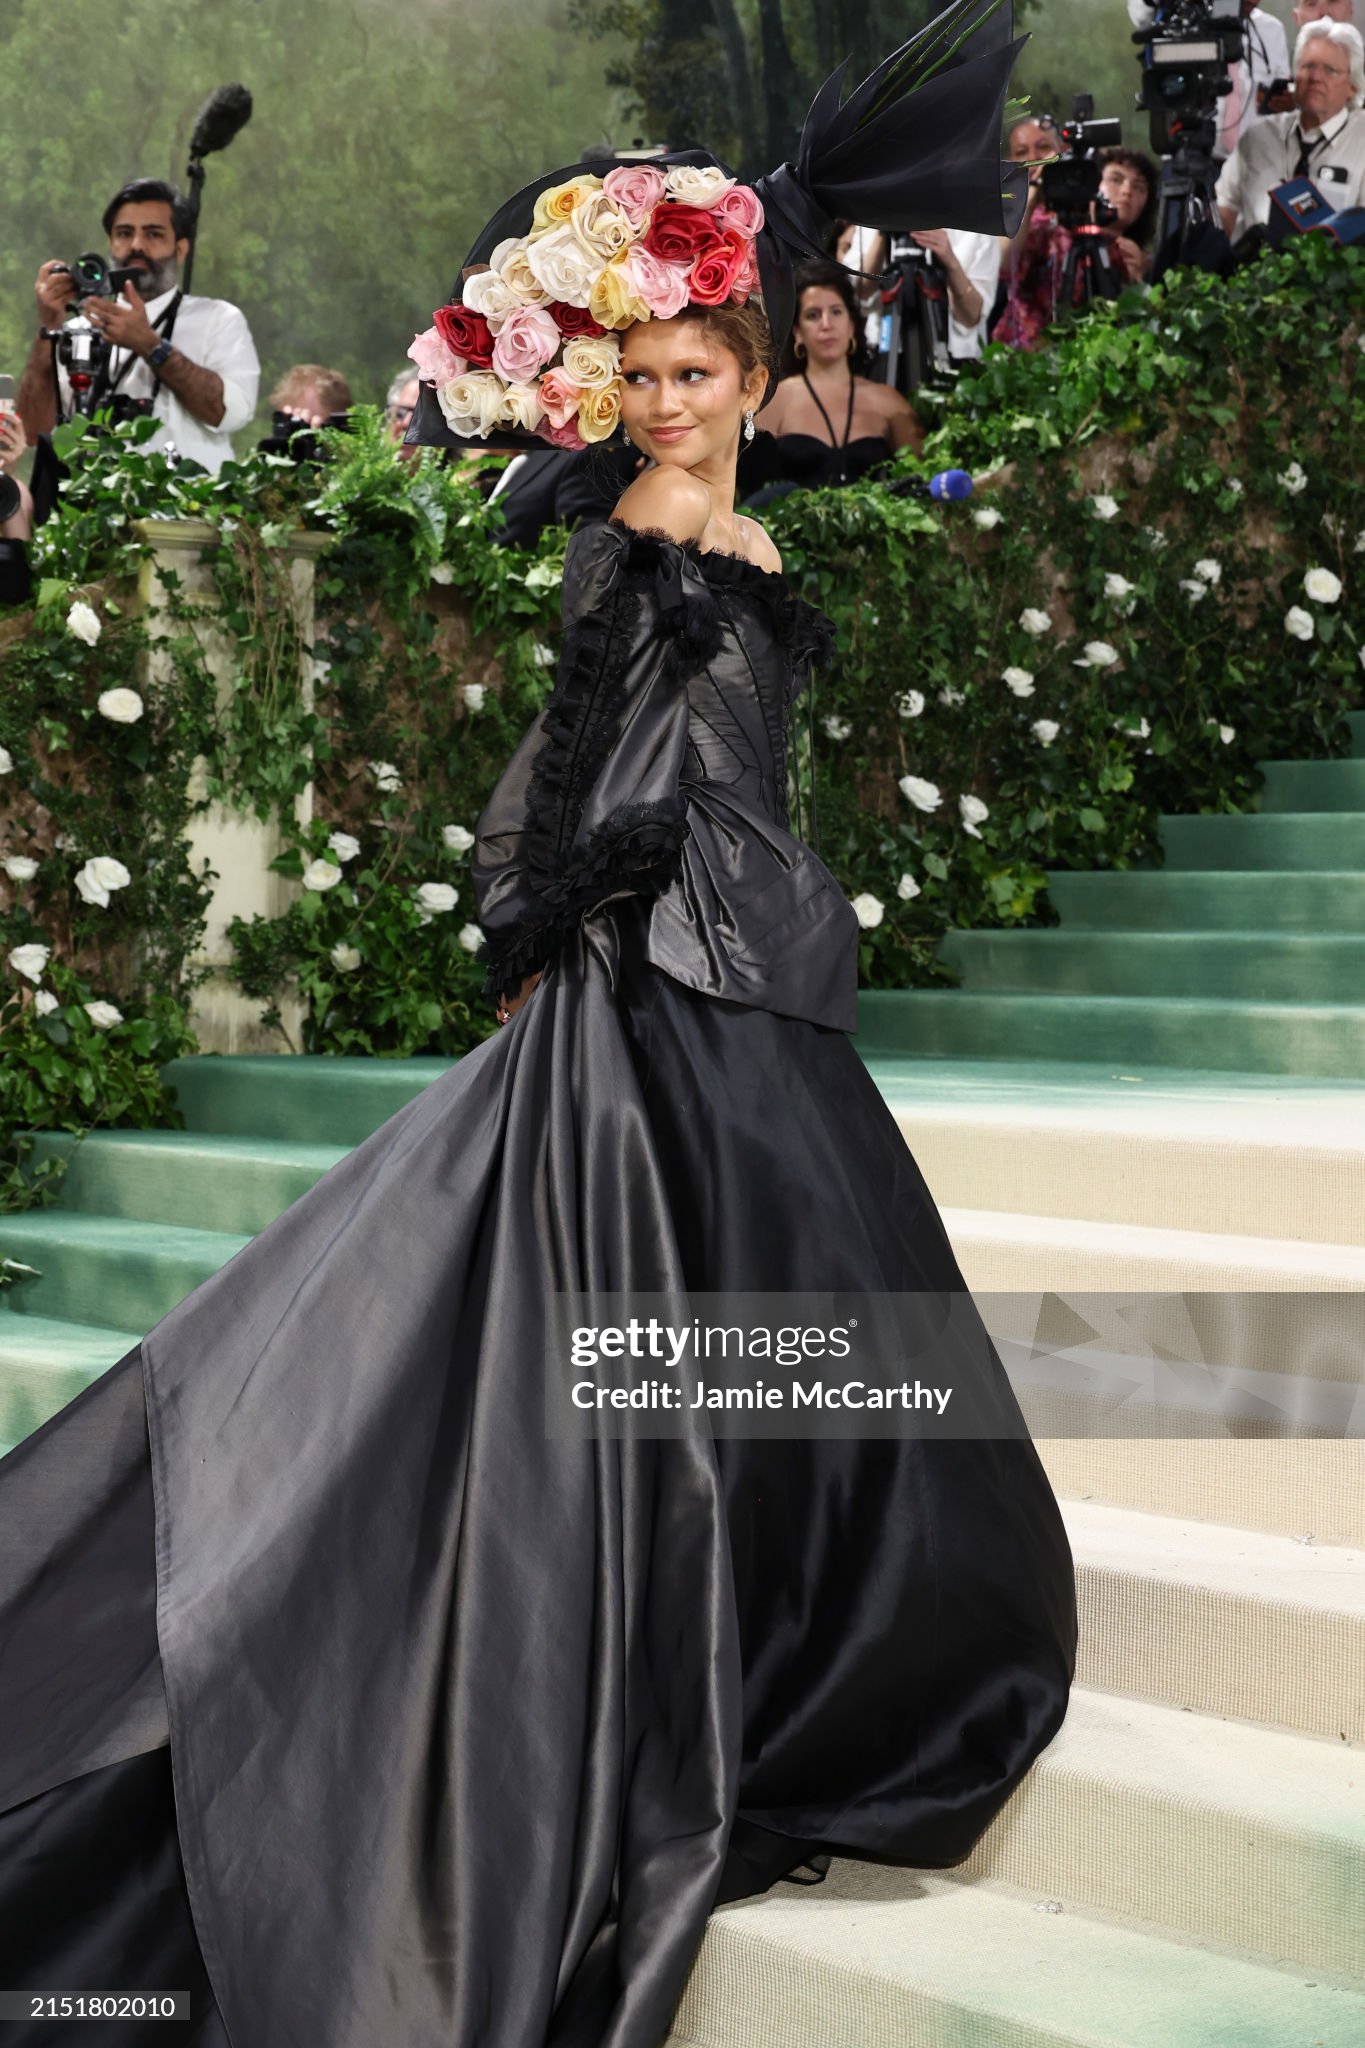 gettyimages-2151802010-2048x2048.jpg